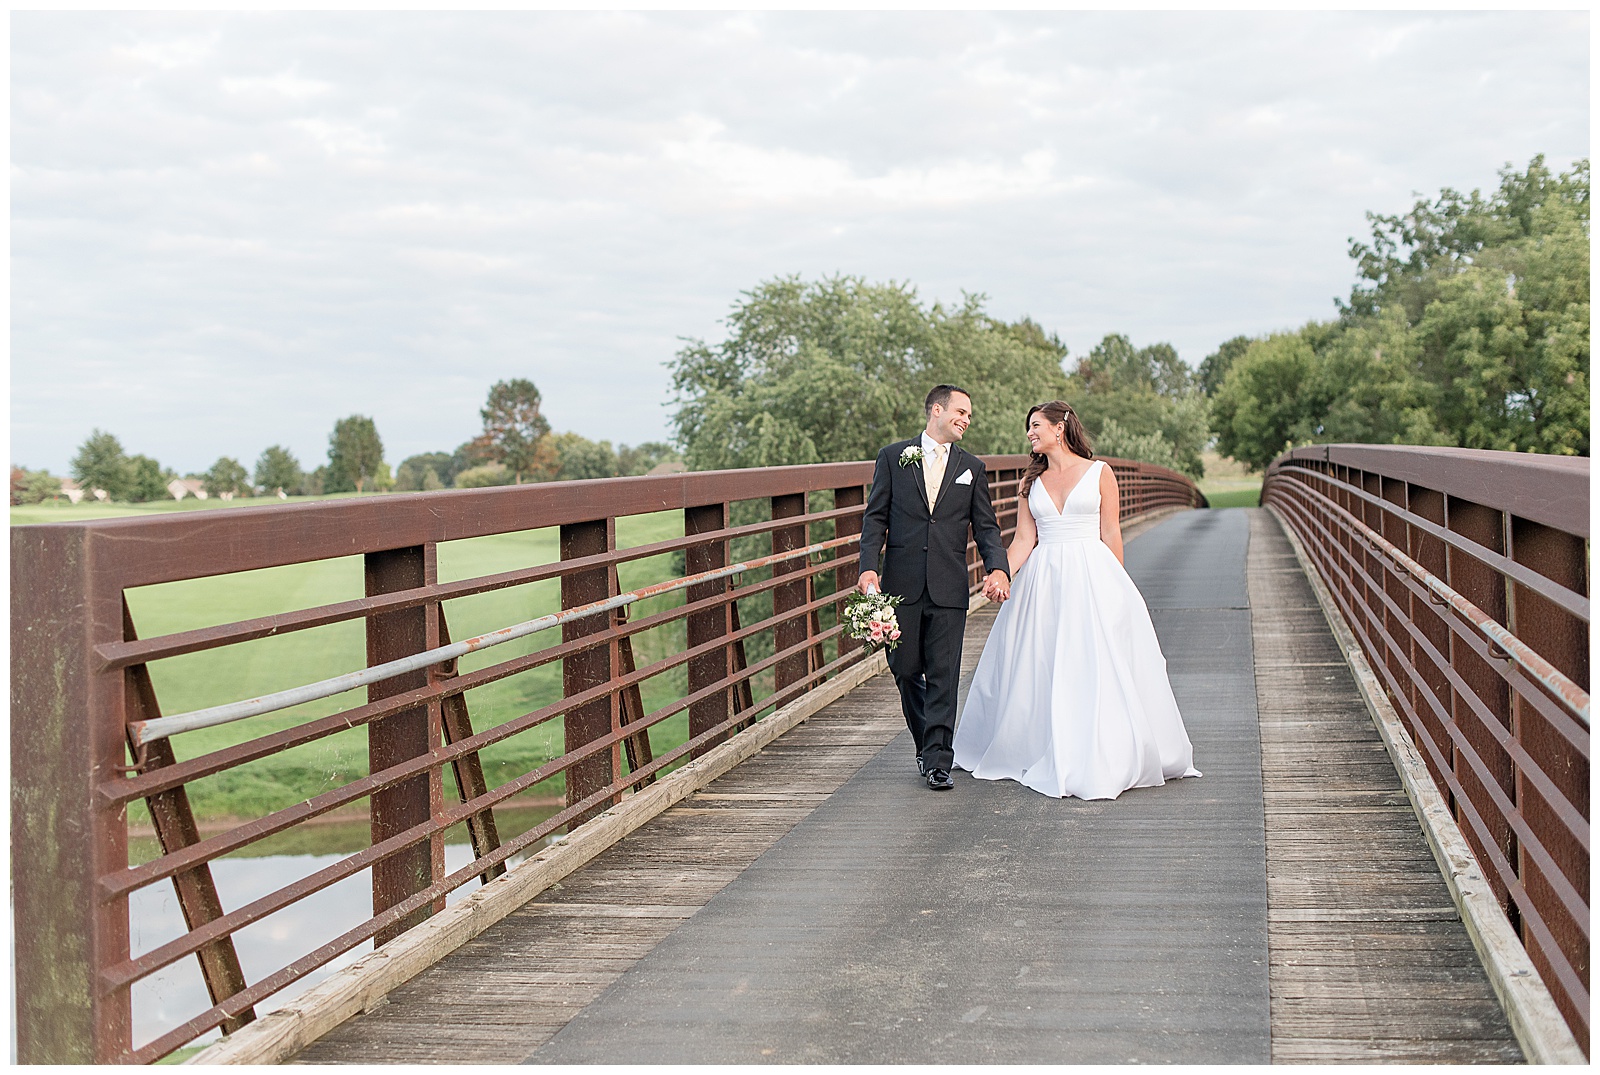 couple walking hand in hand, looking at each other across bridge at golf course